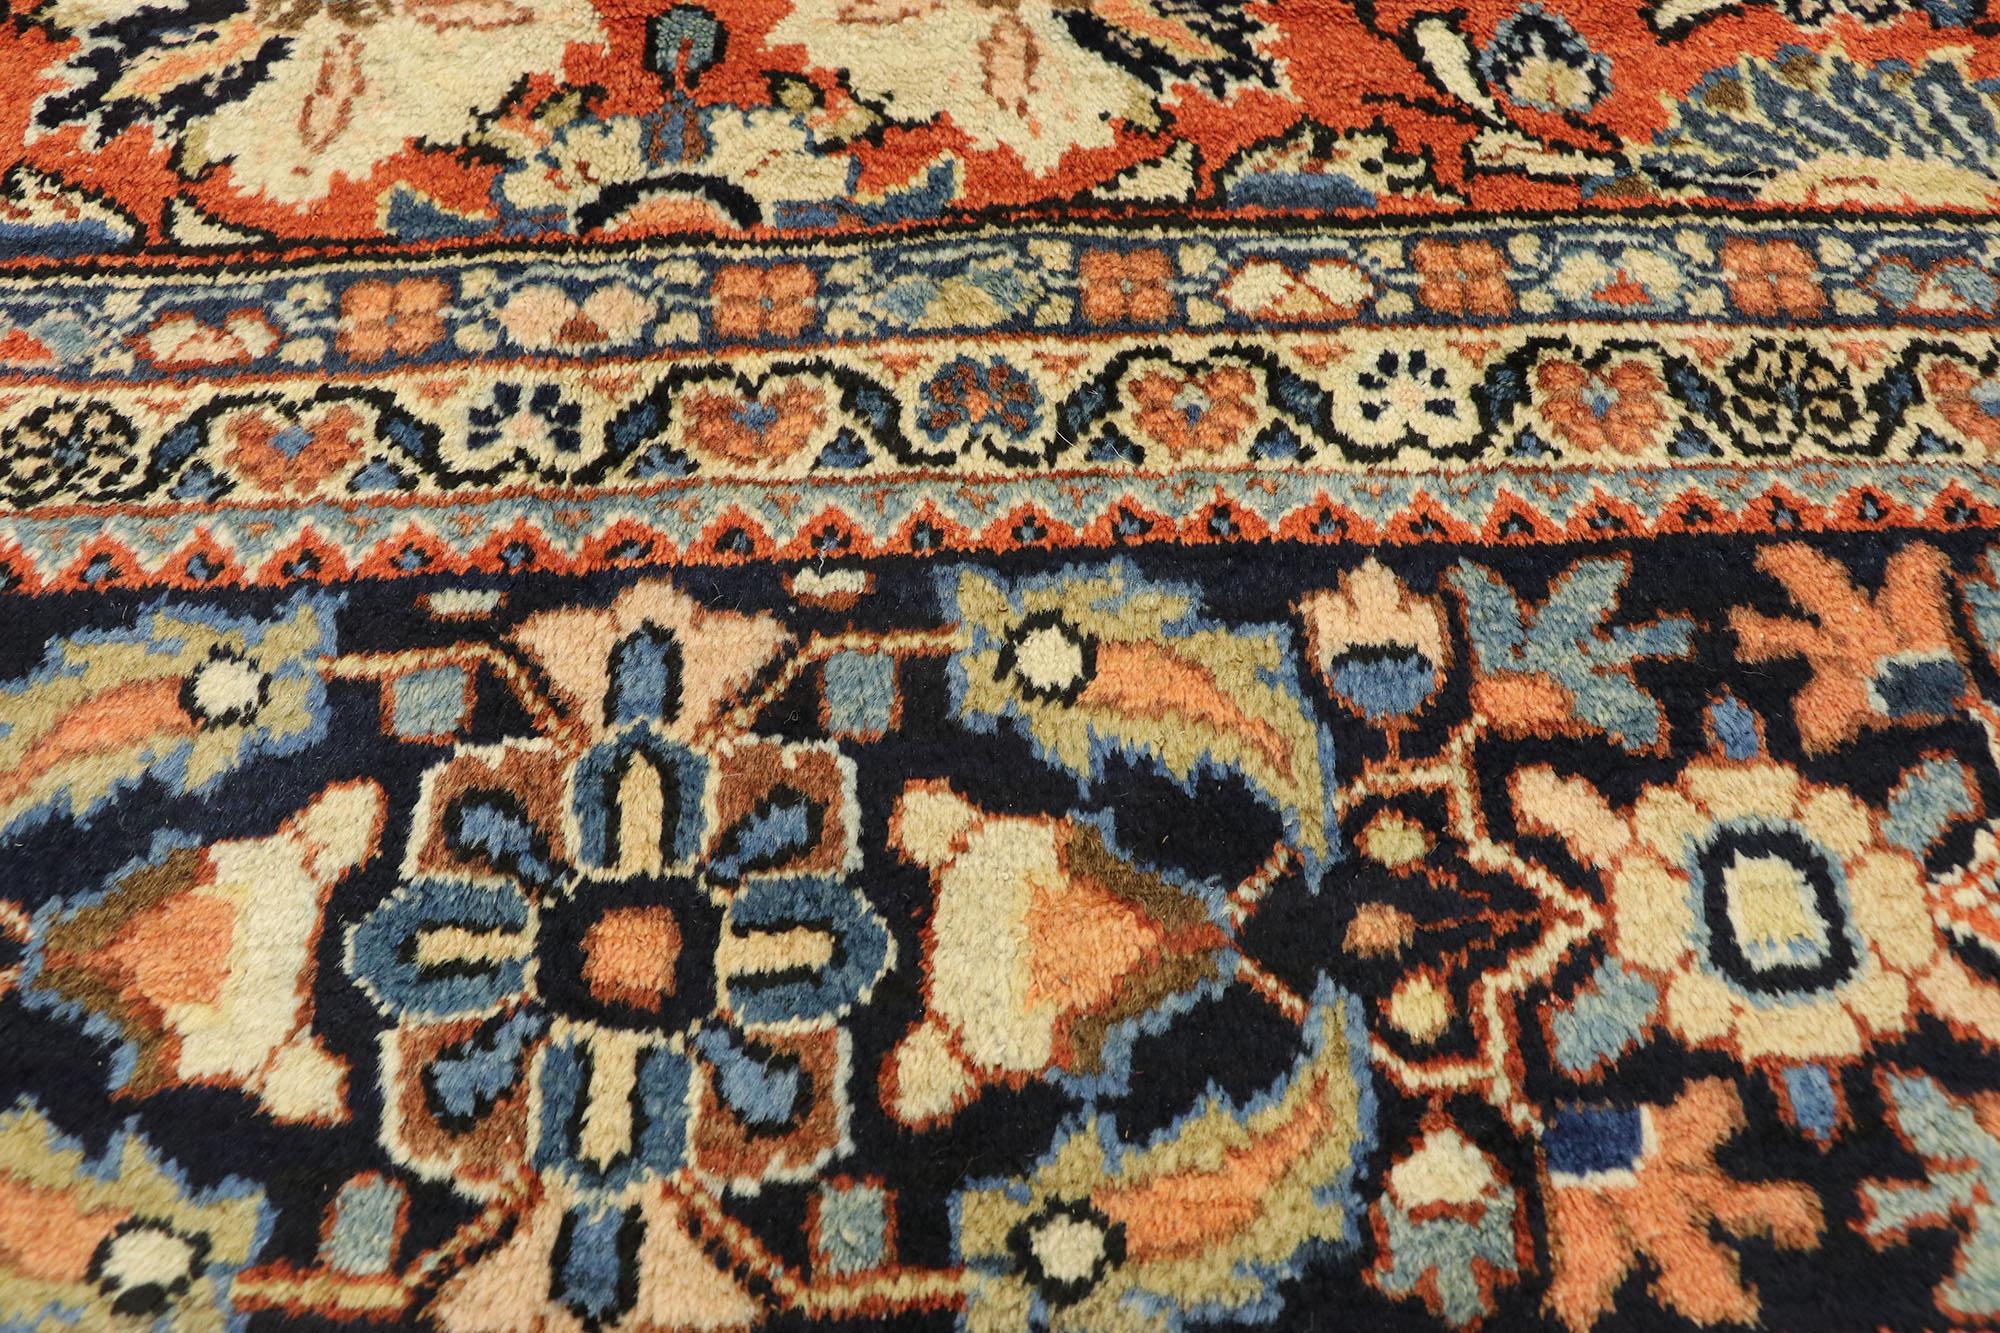 20th Century Antique Persian Mahal Rug with Traditional Federal and American Colonial Style